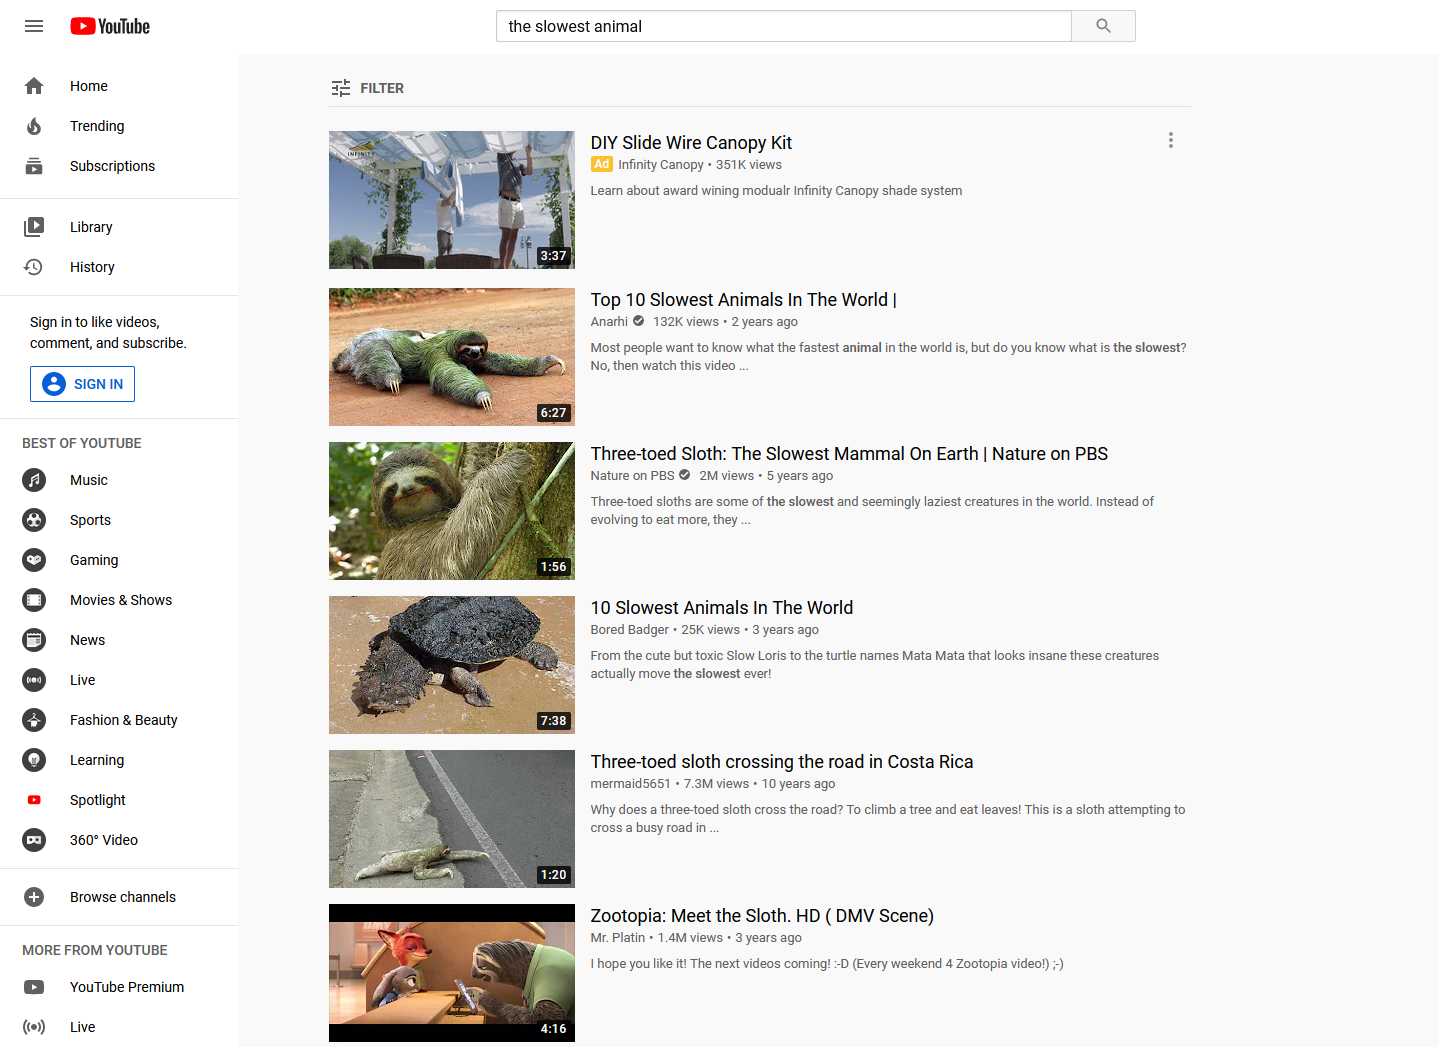 YouTube search for slowest animal